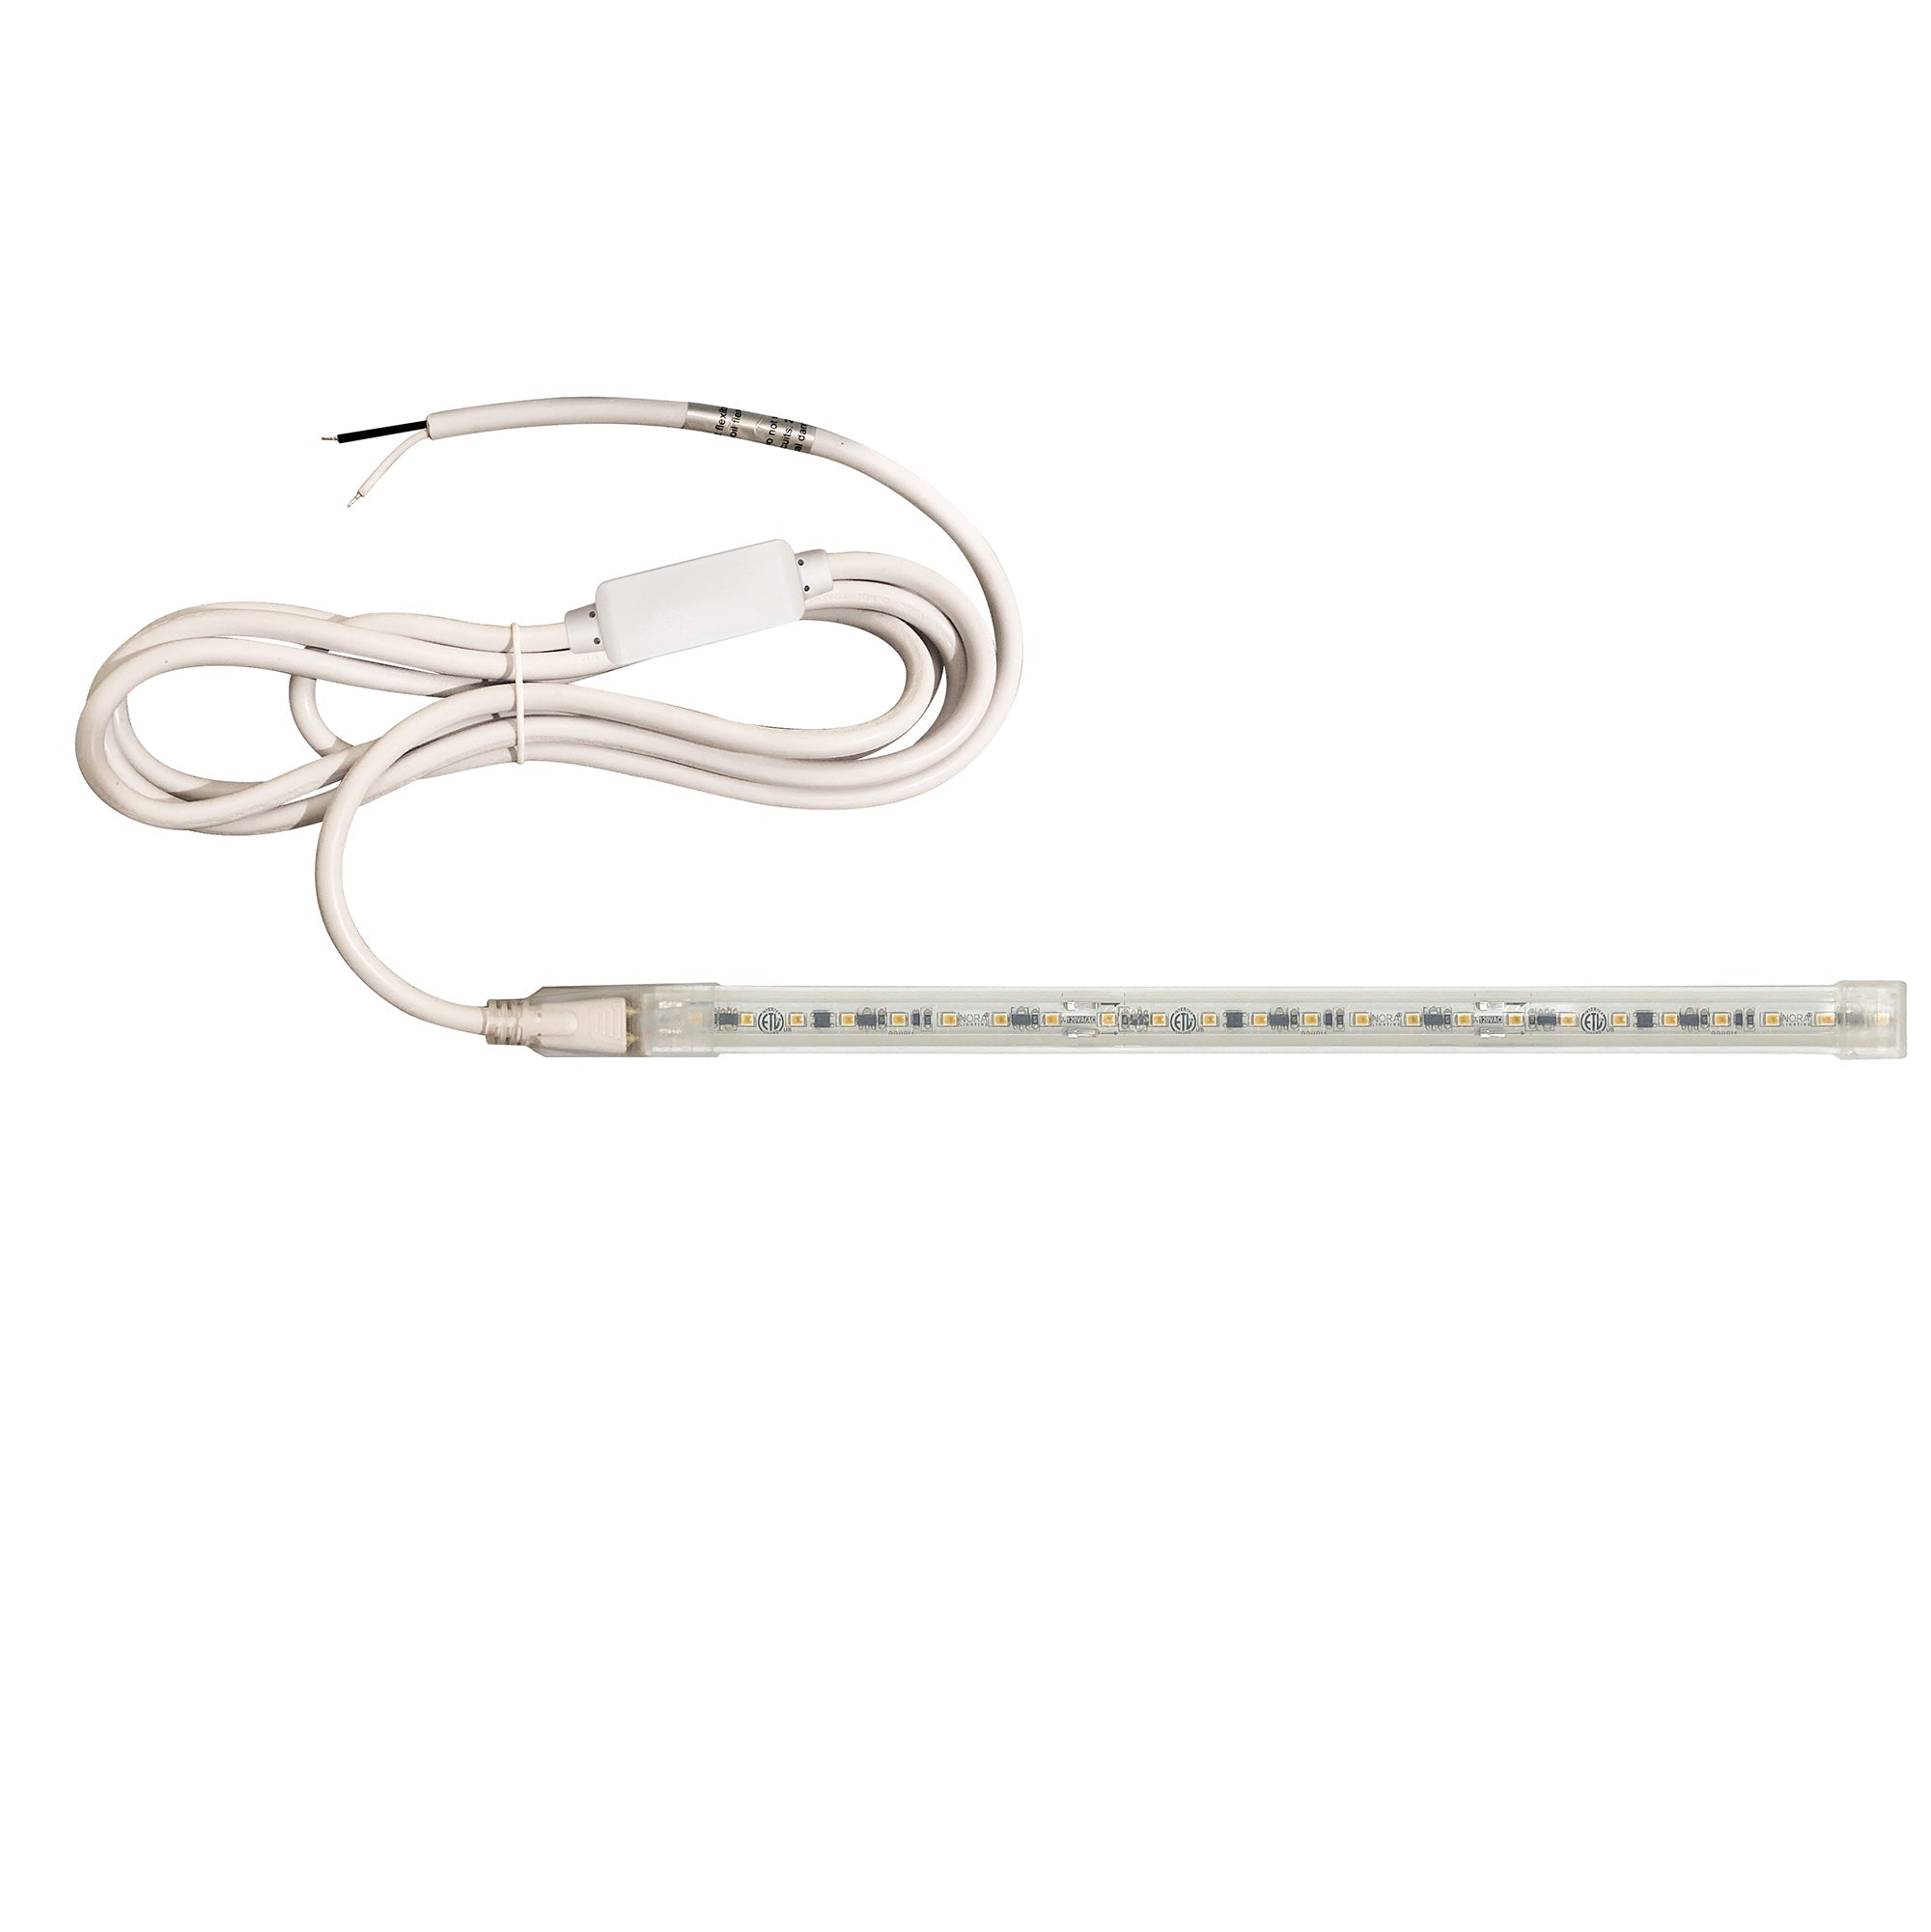 Nora Lighting NUTP13-W12-4-12-940/HWSP - Accent / Undercabinet - Custom Cut 12-ft, 4-in 120V Continuous LED Tape Light, 330lm / 3.6W per foot, 4000K, w/ Mounting Clips and 8' Hardwired Power Cord w/ Surge Protector